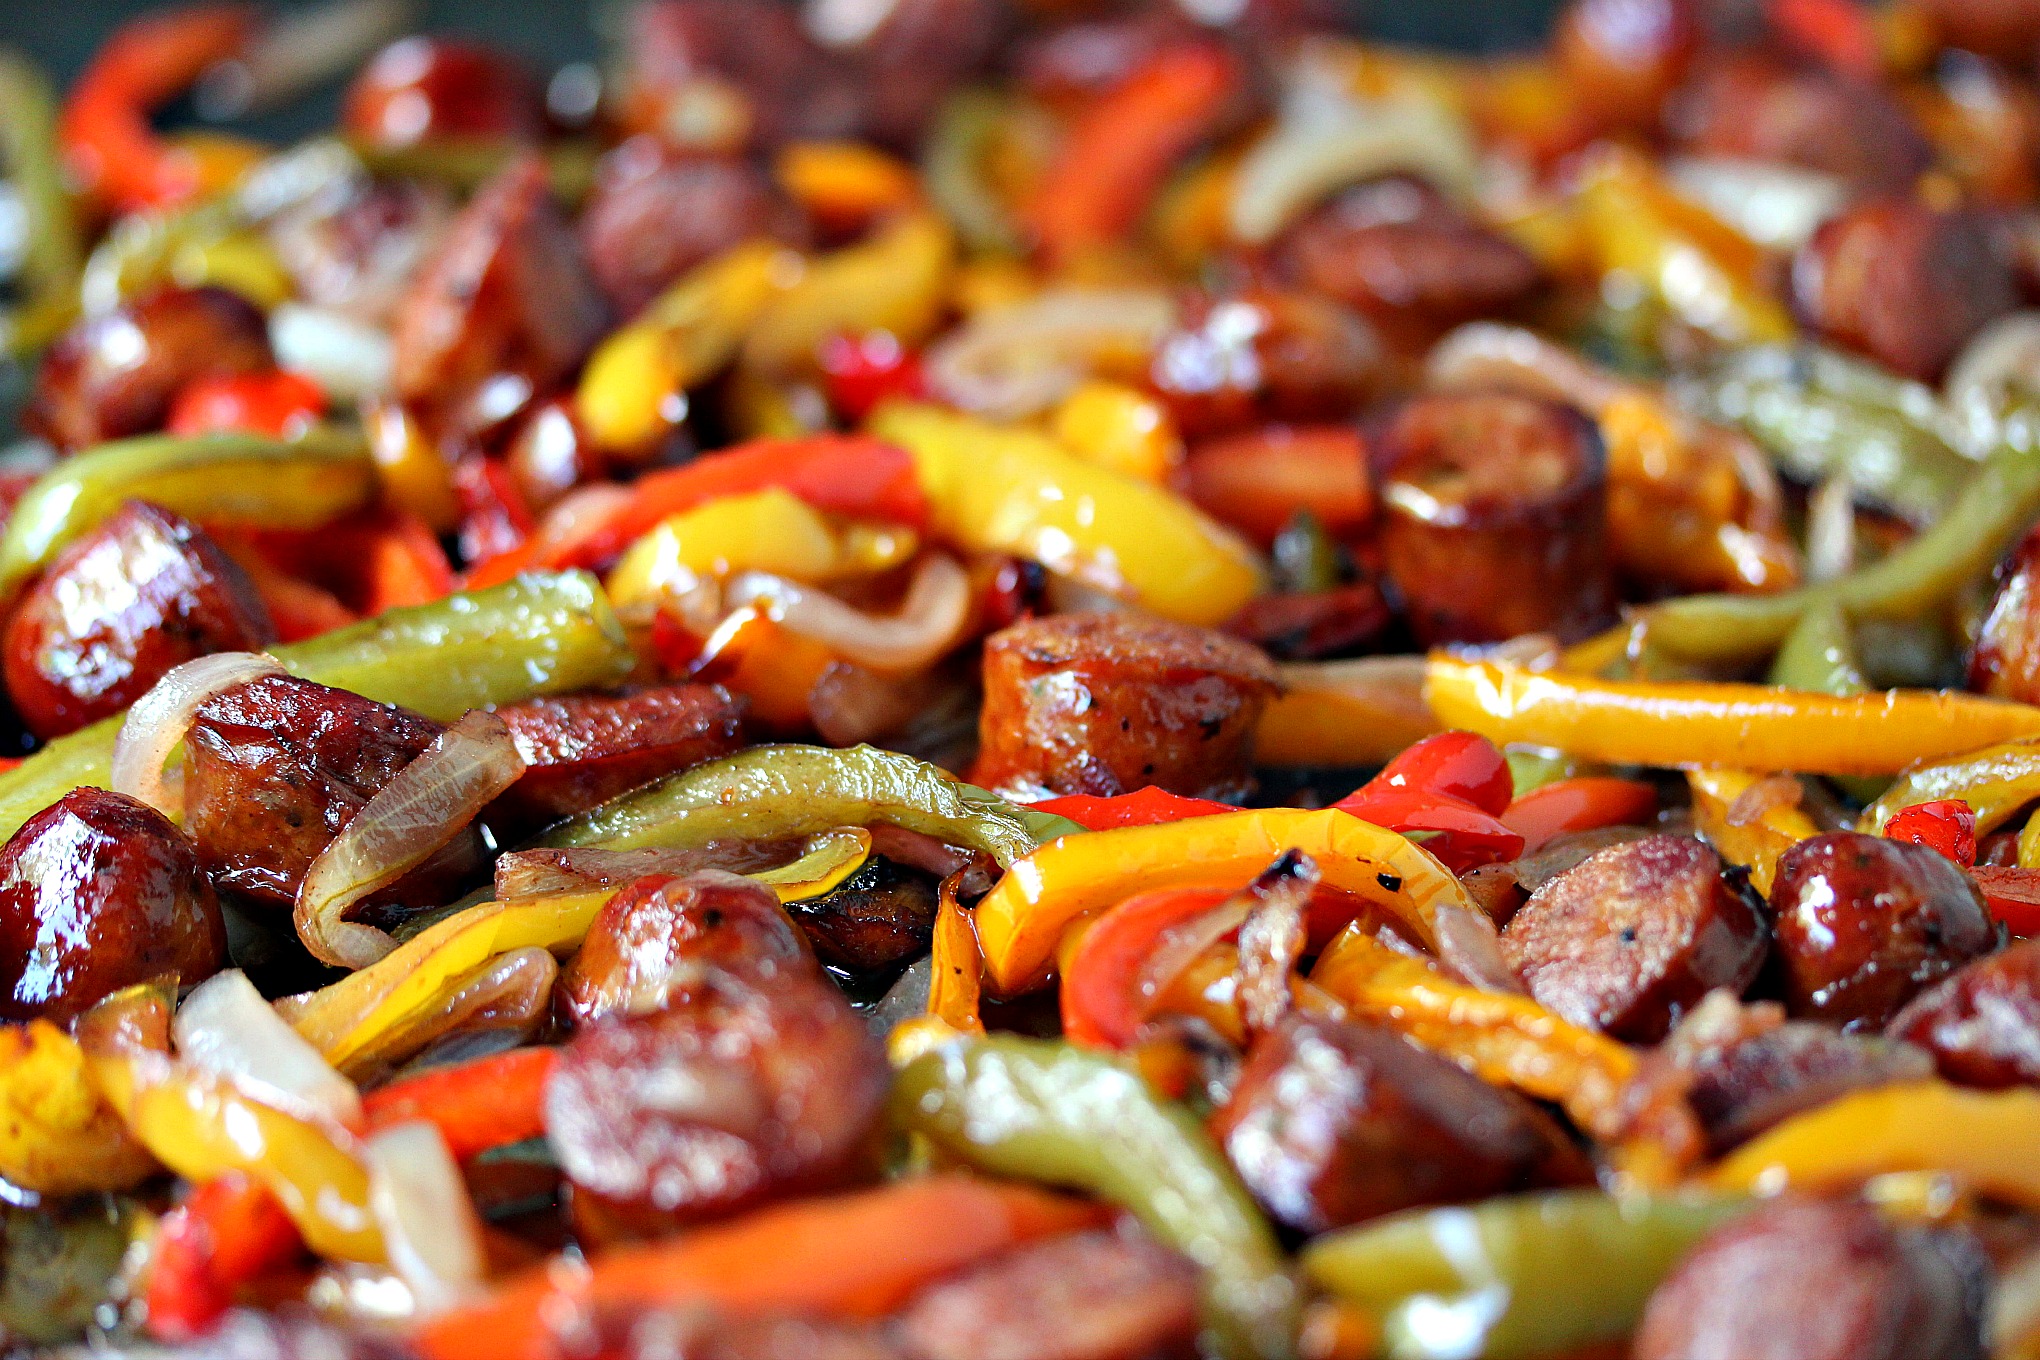 Sheet Pan Sausage and Peppers from cravingsofalunatic.com- This recipe is simple to make yet full of flavour. It's perfect to eat on its own, or pile it high on a hoagie bun. One pan, a few simple ingredients, and you have the perfect lunch or dinner recipe. (@CravingsLunatic)